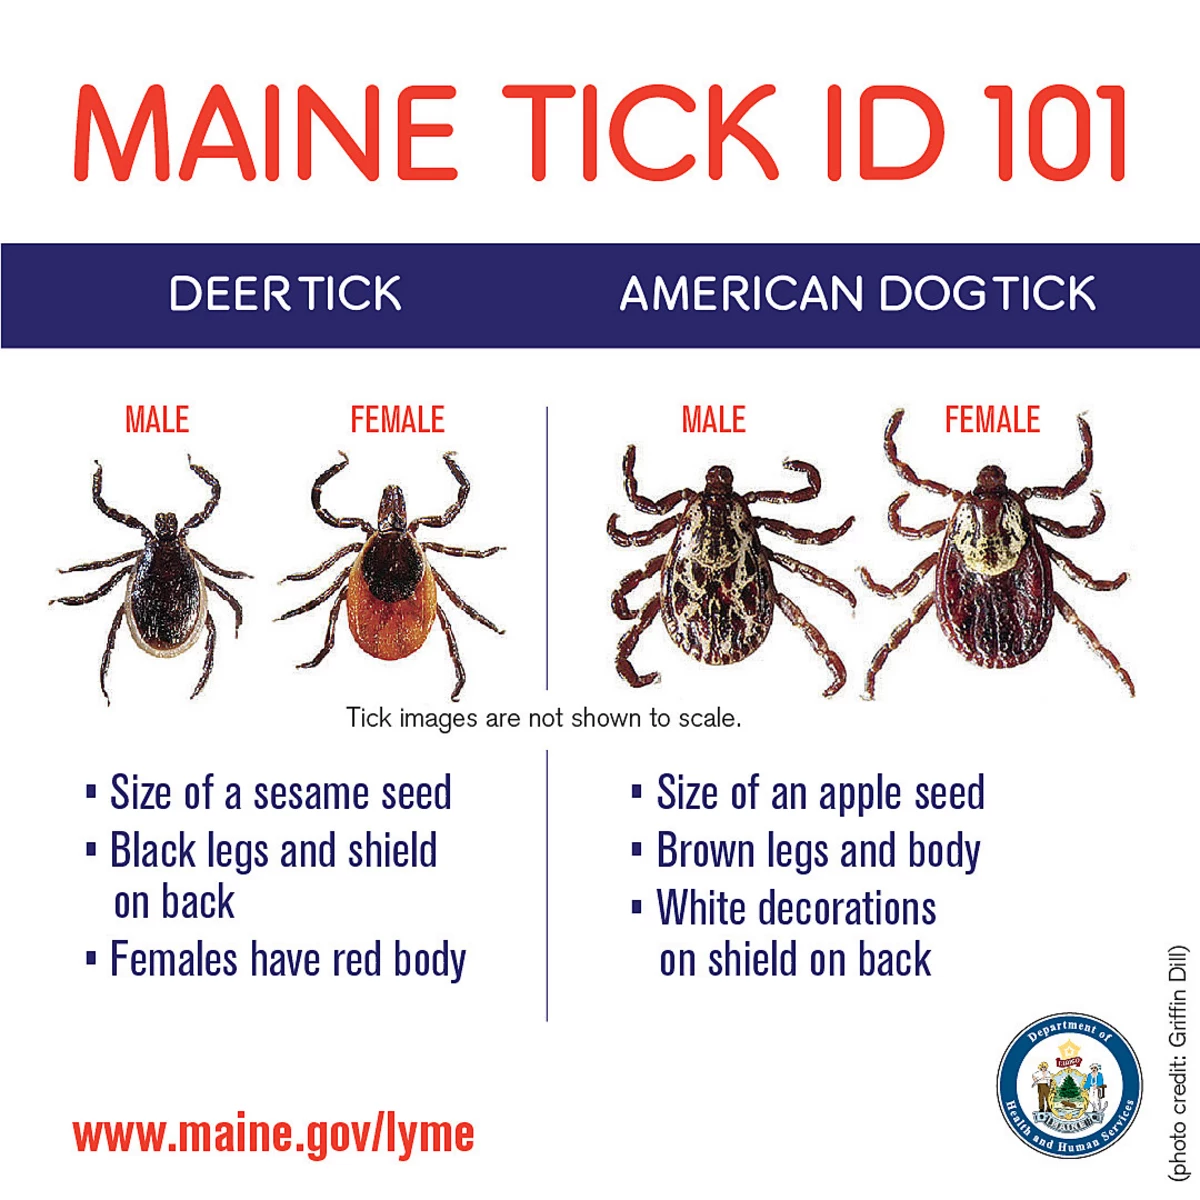 Dog Ticks Are Scary. Deer Ticks Are Evil. Can You Tell Them Apart